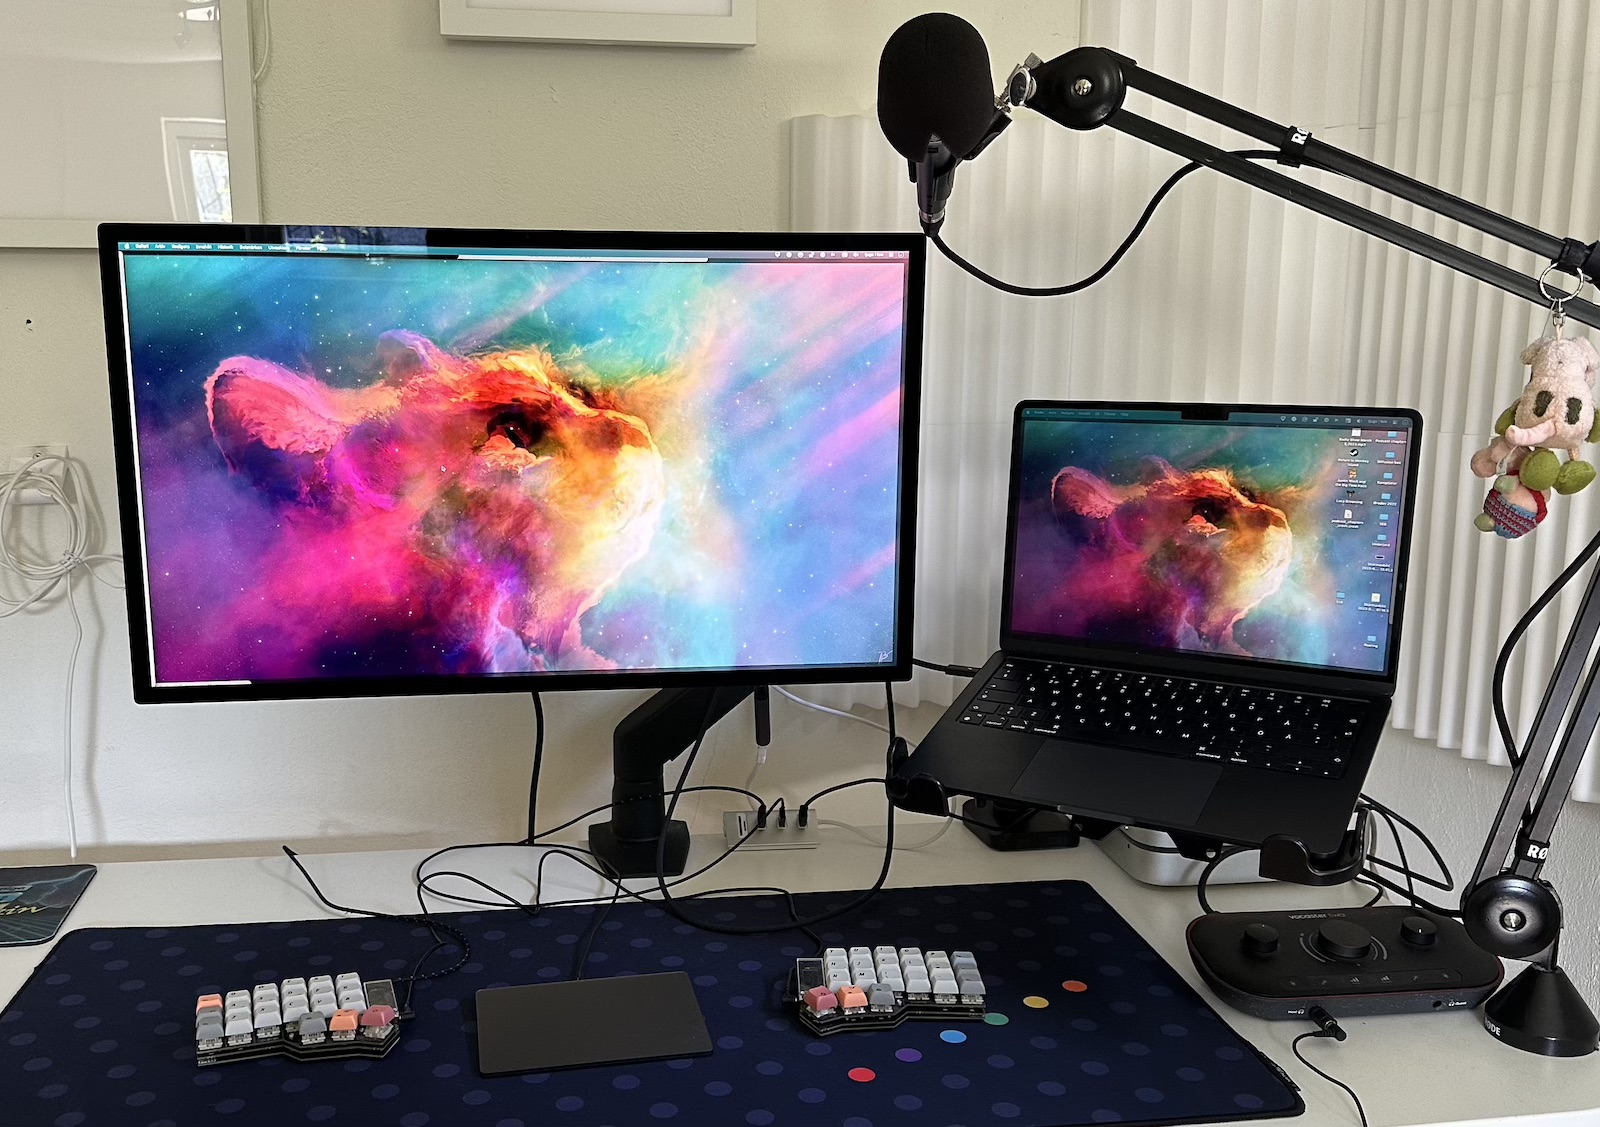 Desk with monitor and laptop on VESA arms, microphone on own arm